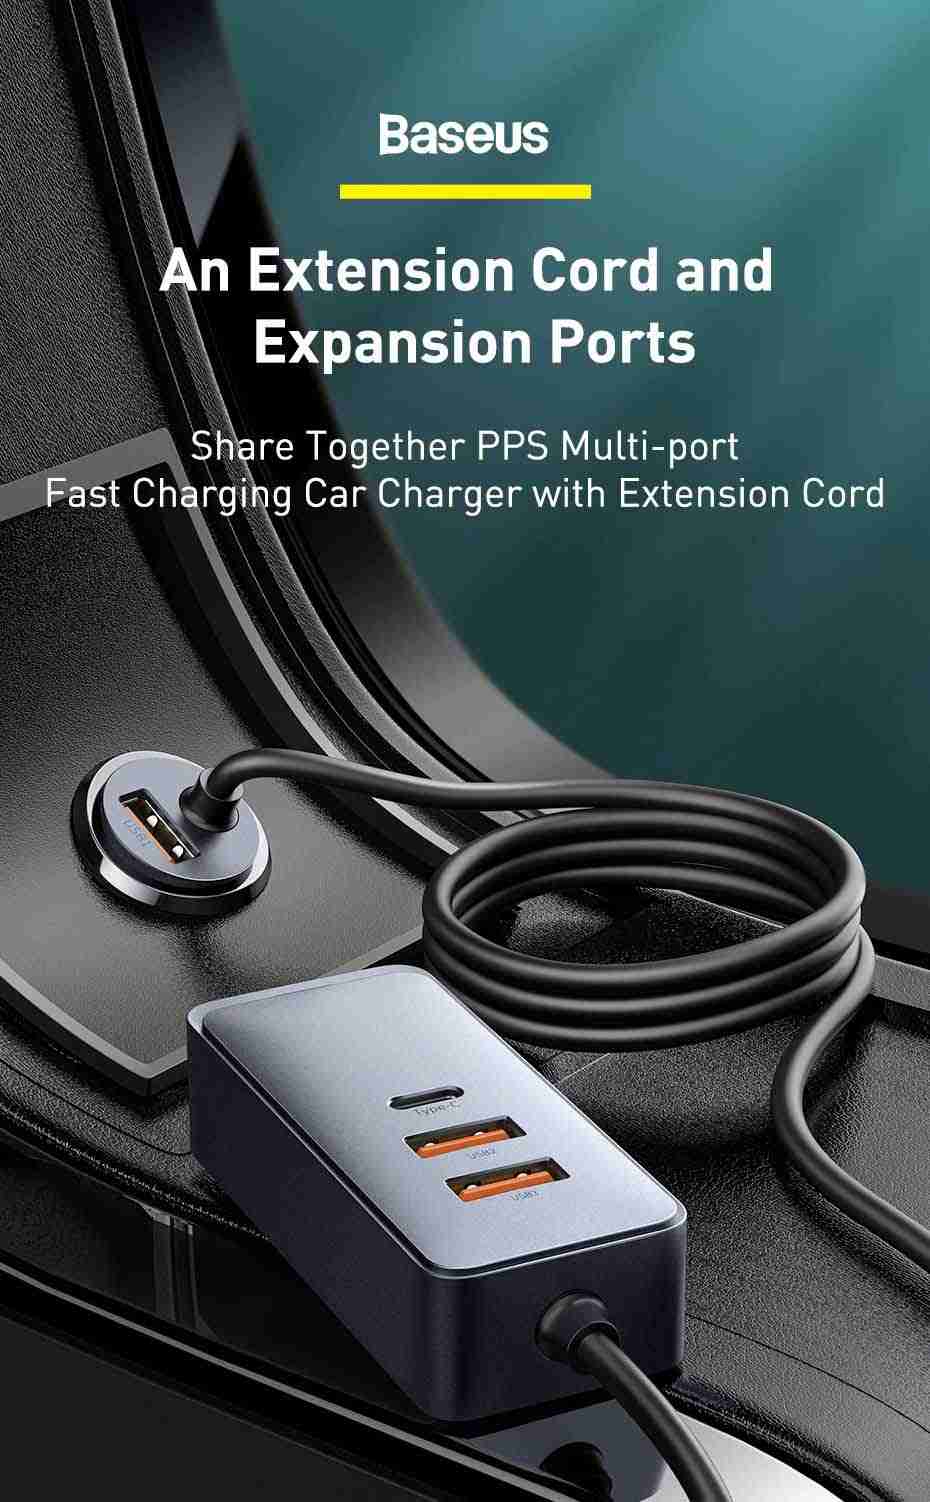 Baseus Share Together PPS Multi-port Fast Charging Car Charger review